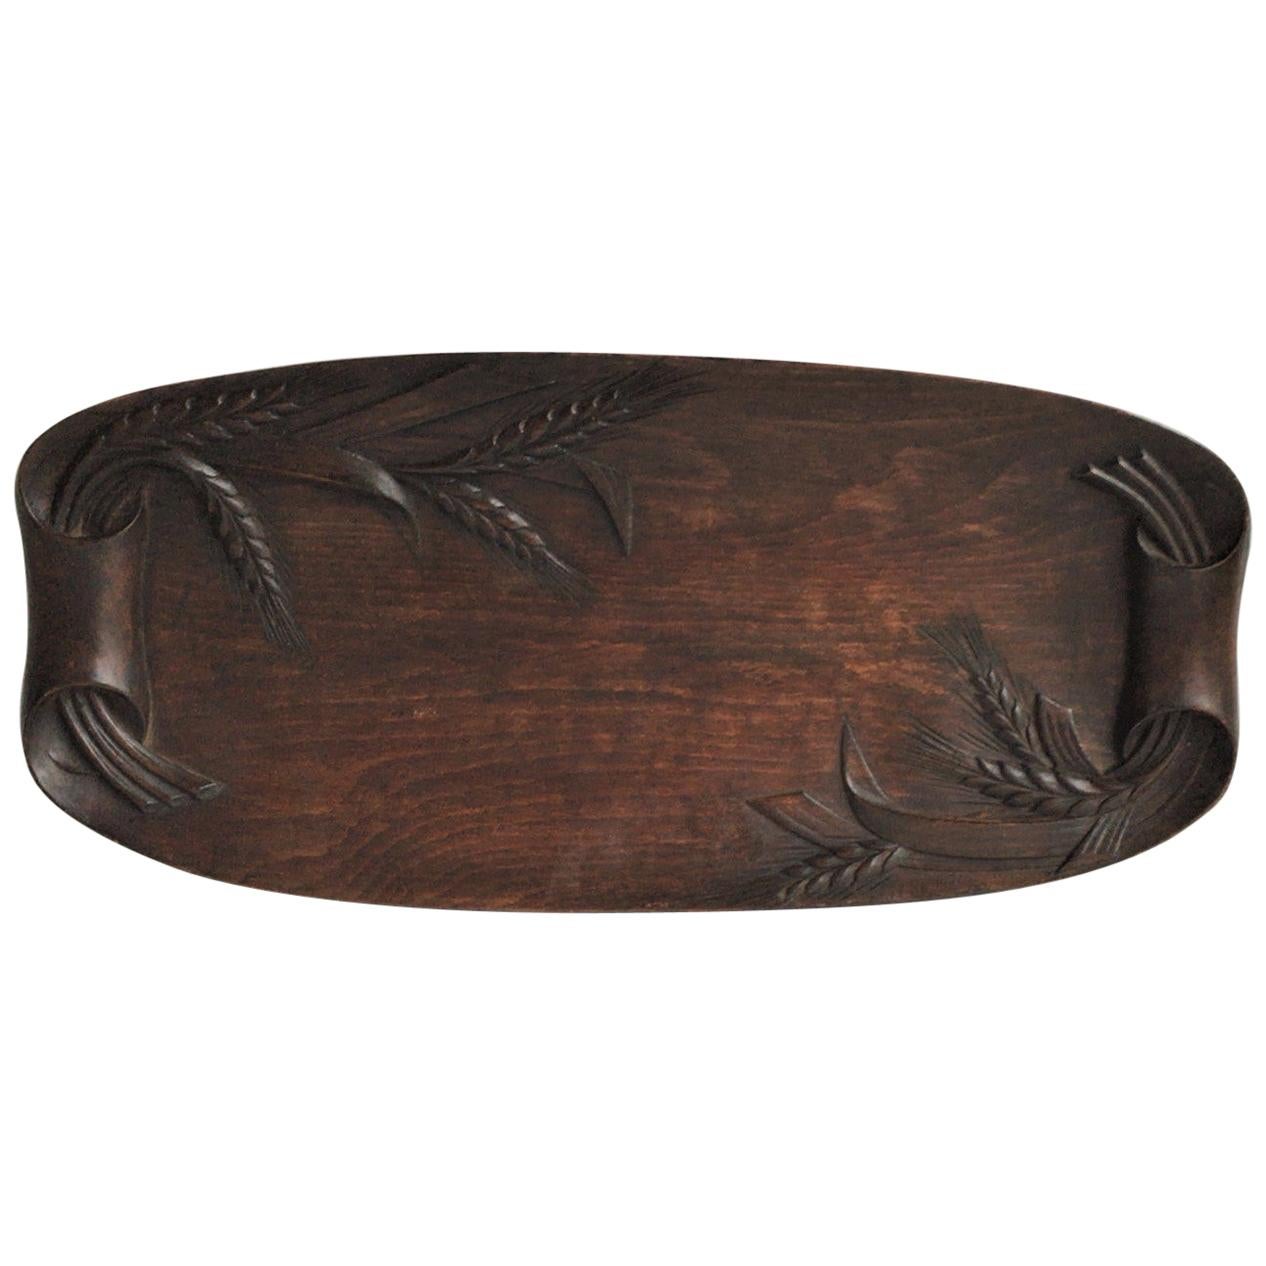 Large French Carved Wood Bread Platter with Ear of Wheat, circa 1900